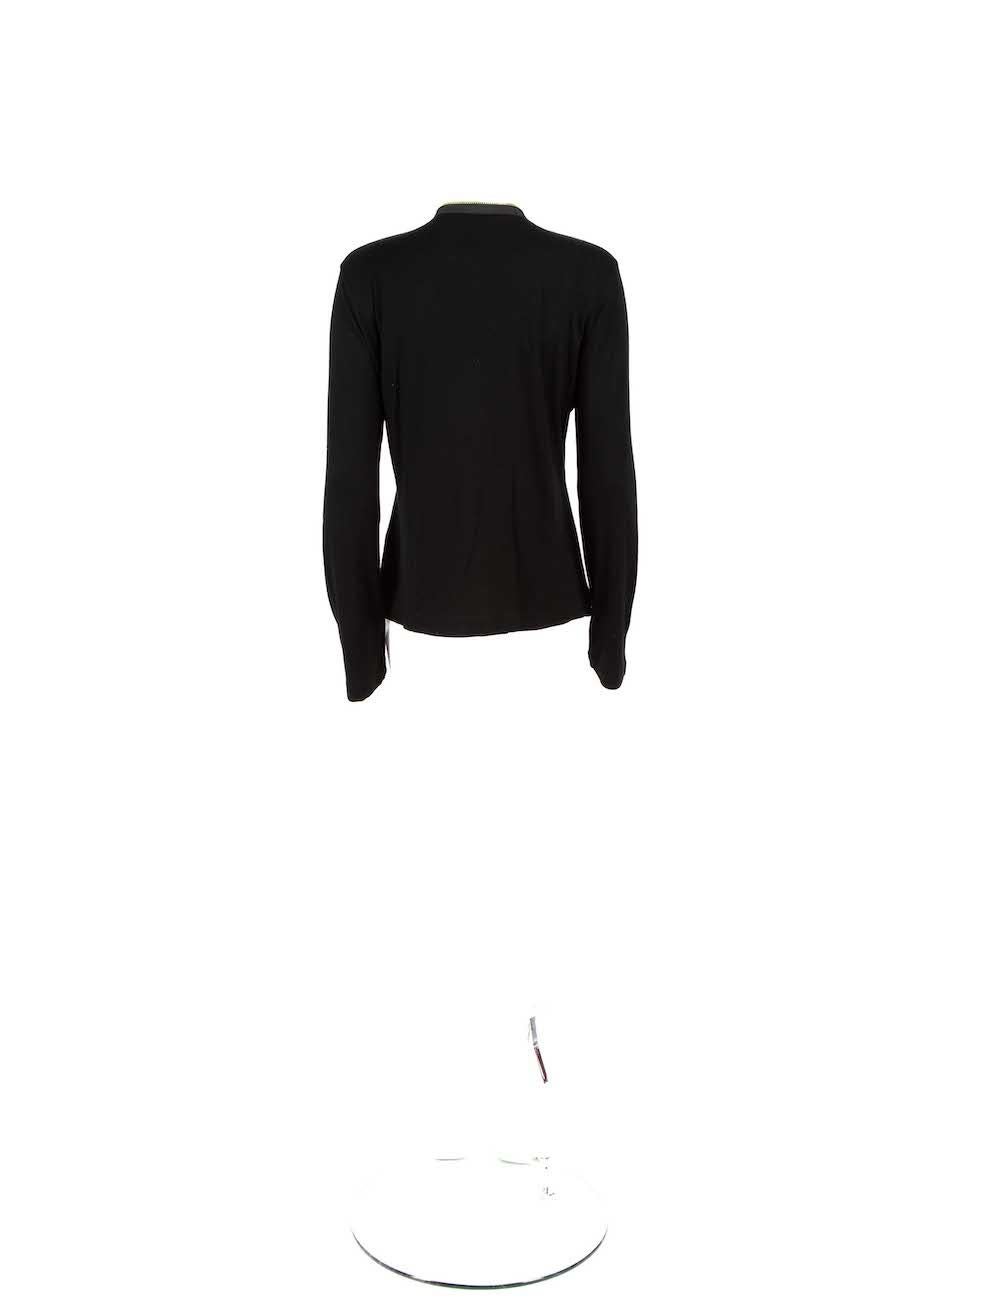 Tom Ford Black Fine Knit Zipped Jacket Size XL In Good Condition For Sale In London, GB